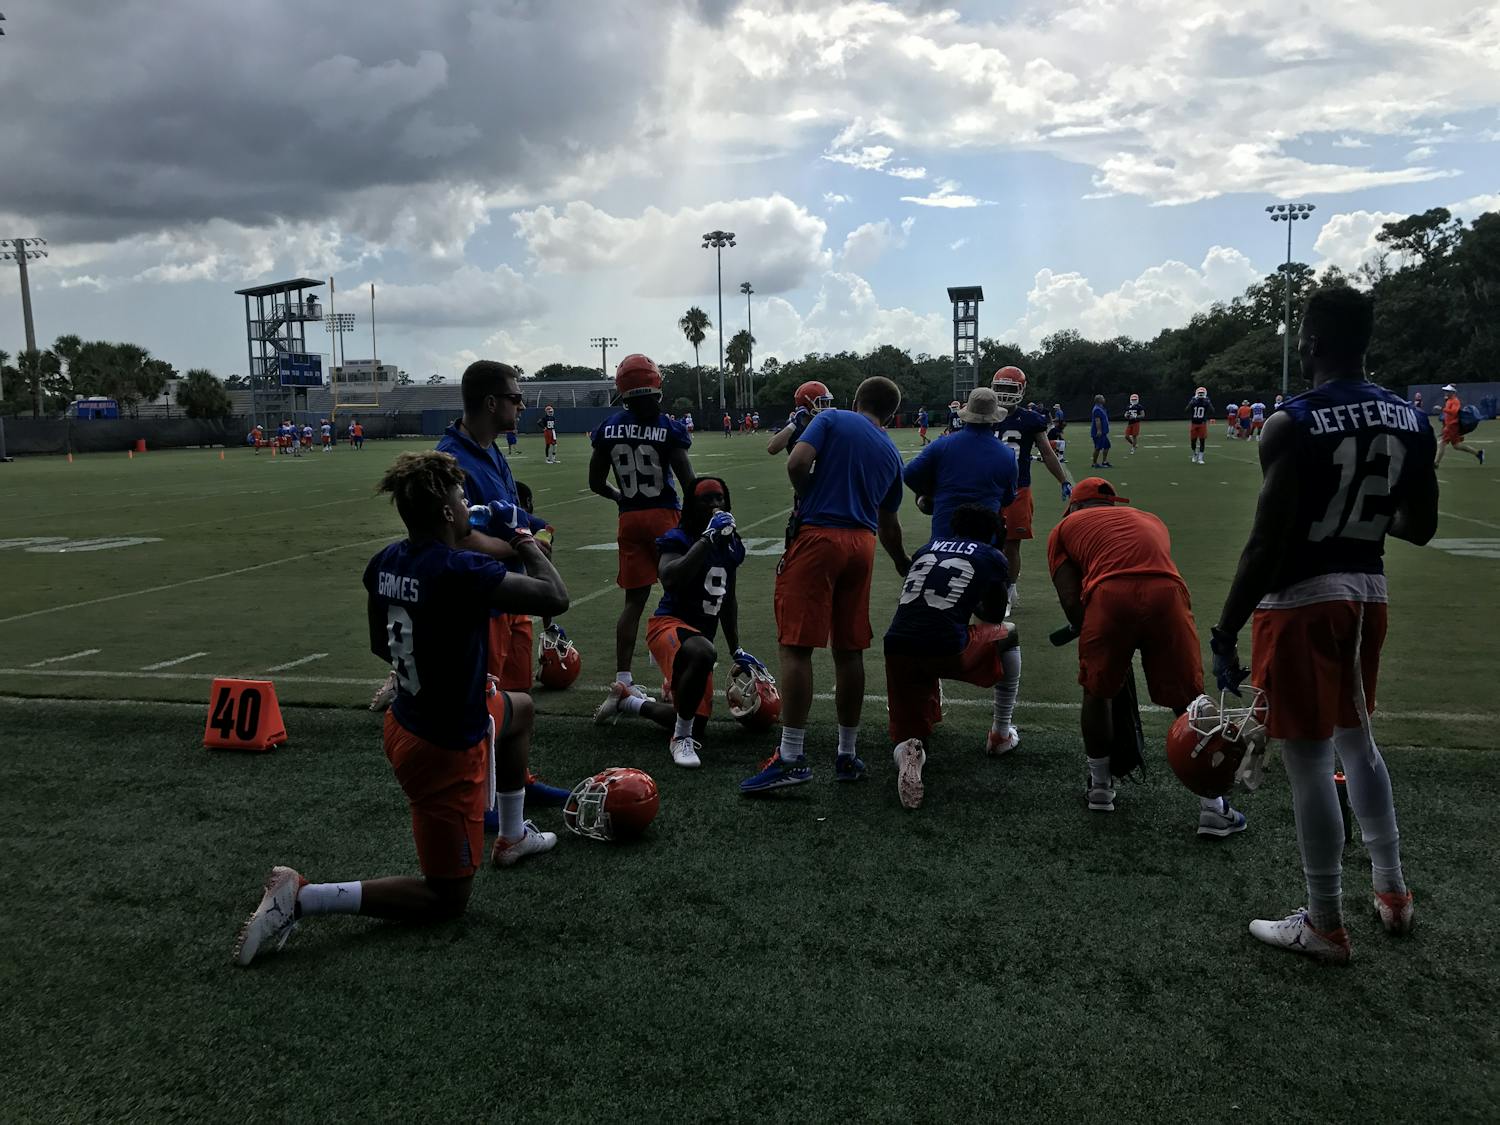 A unit of Florida wide receivers, including transfers Van Jefferson (12) and Trevon Grimes (8), rests during Day 1 of fall camp after catching passes from the quarterbacks. 